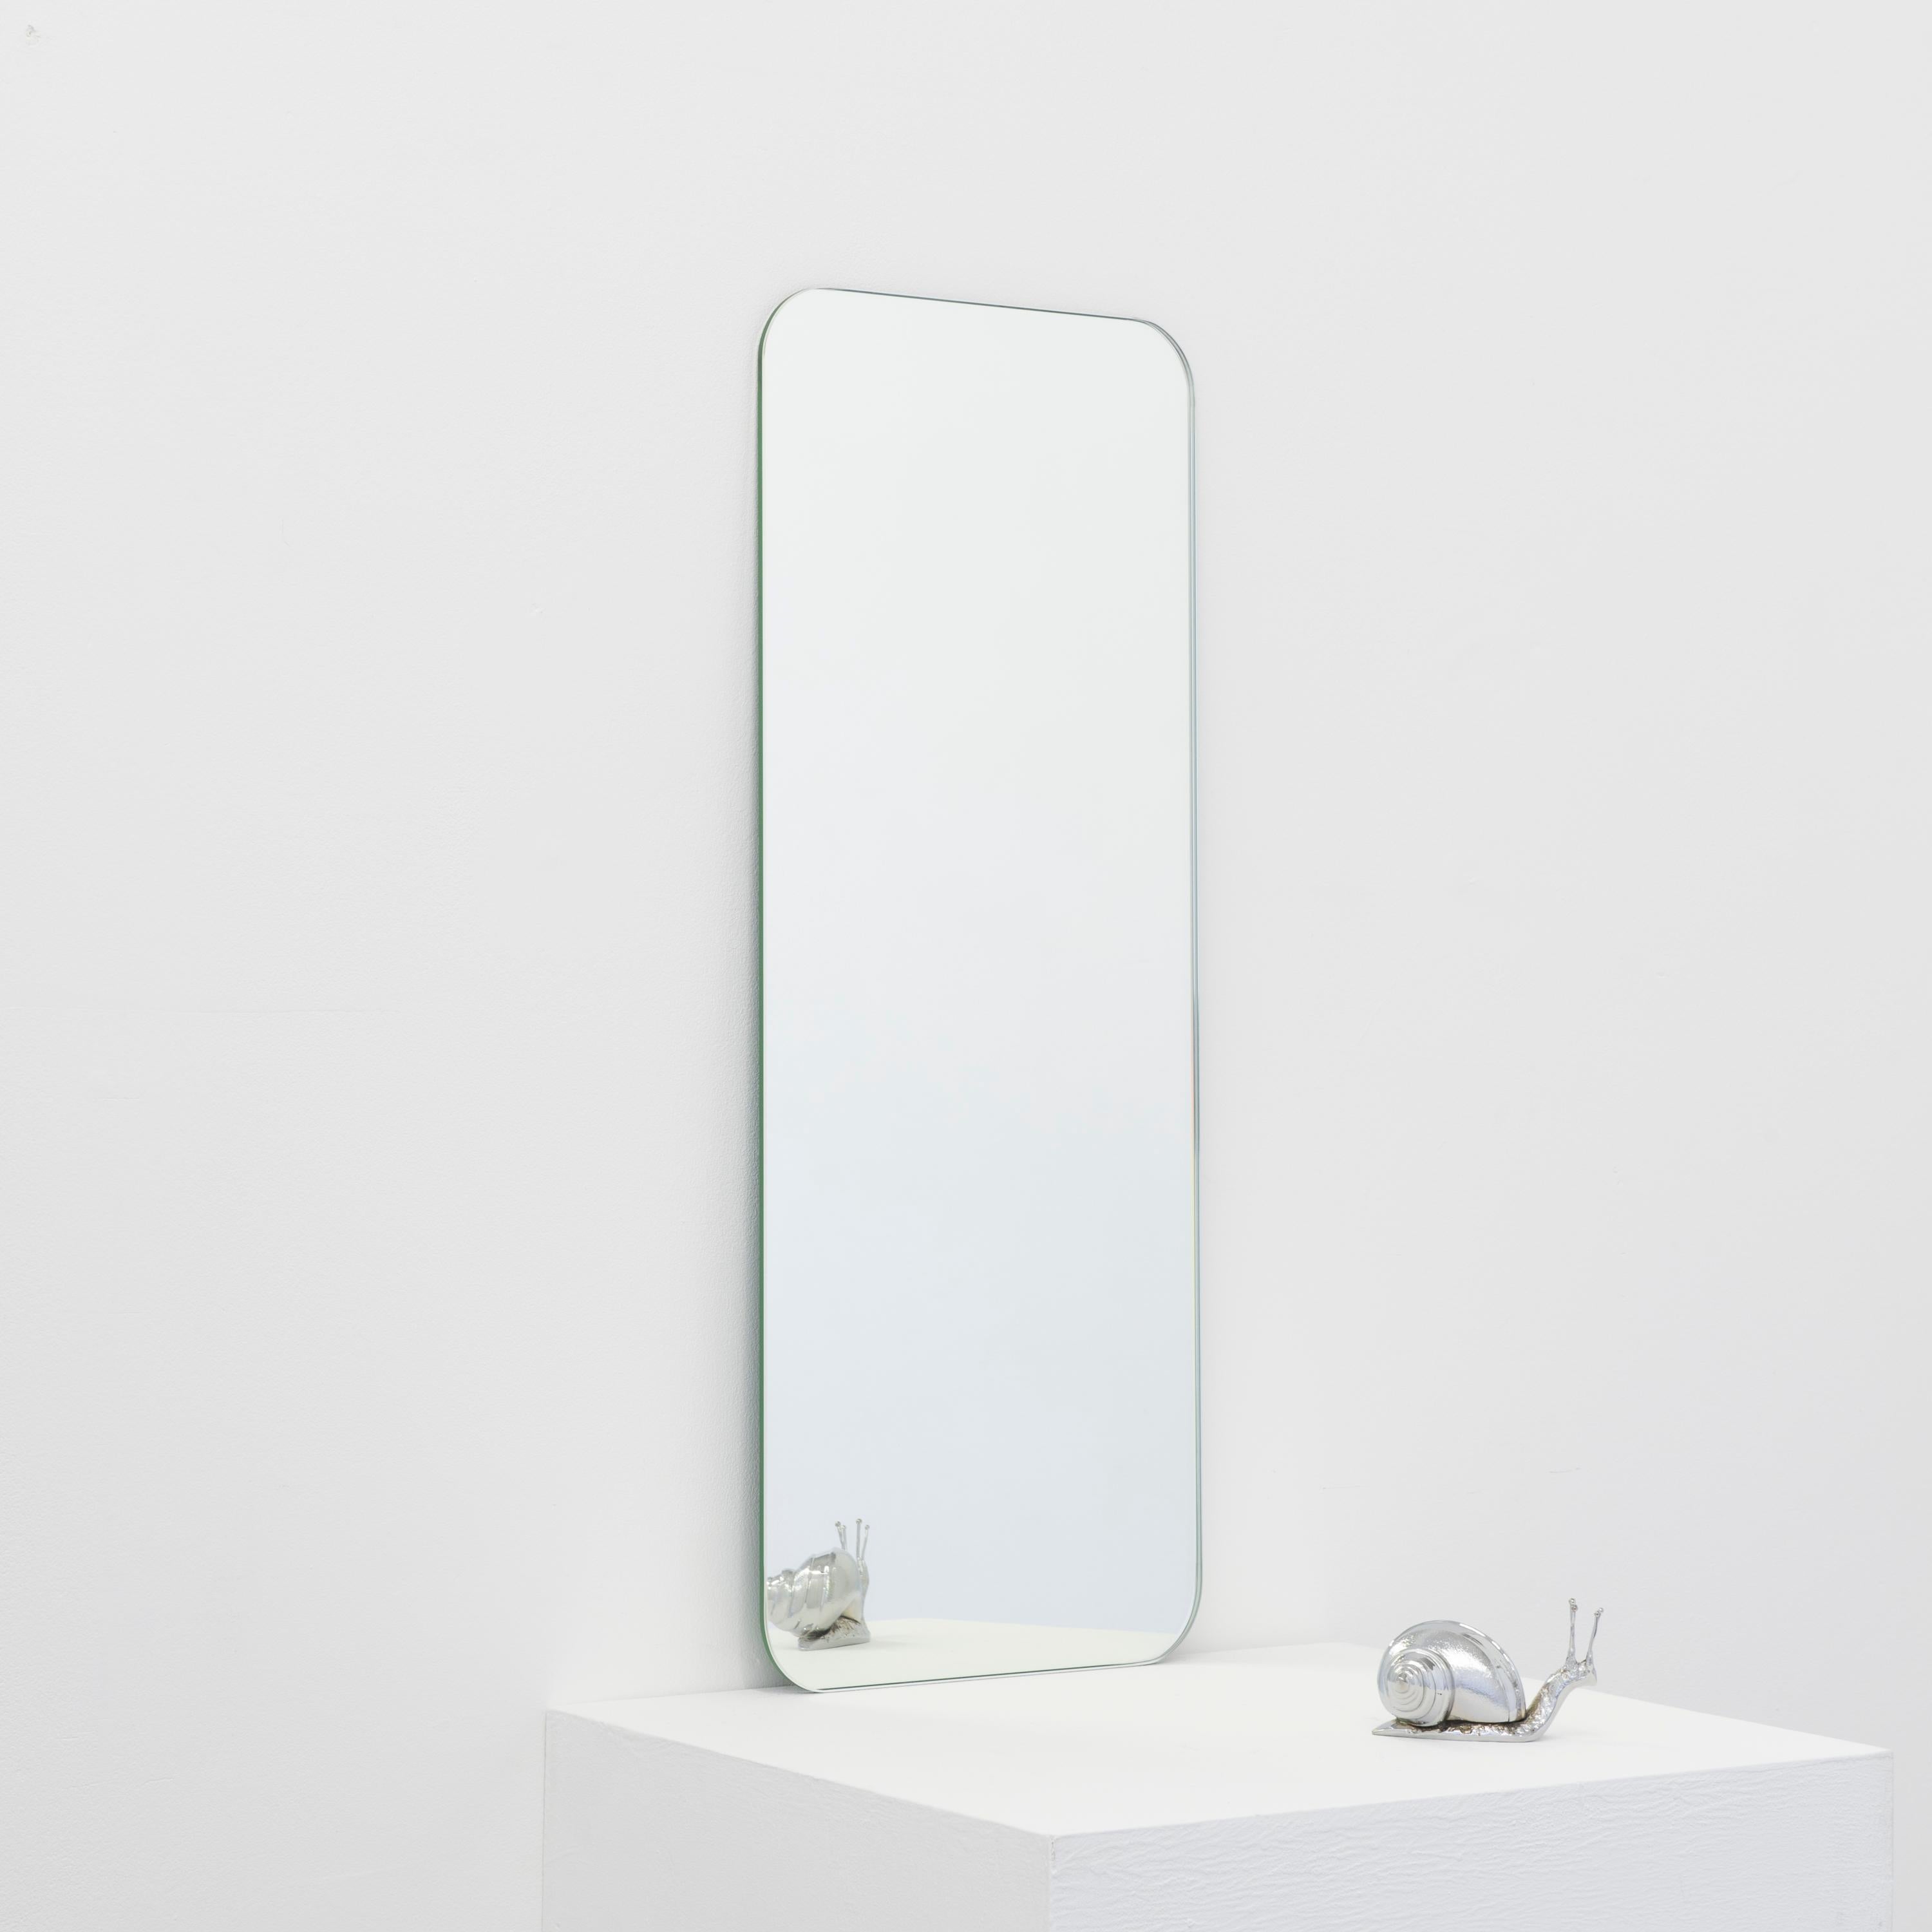 Minimalist Quadris Rectangular Contemporary Frameless Mirror with Floating Effect, XL For Sale